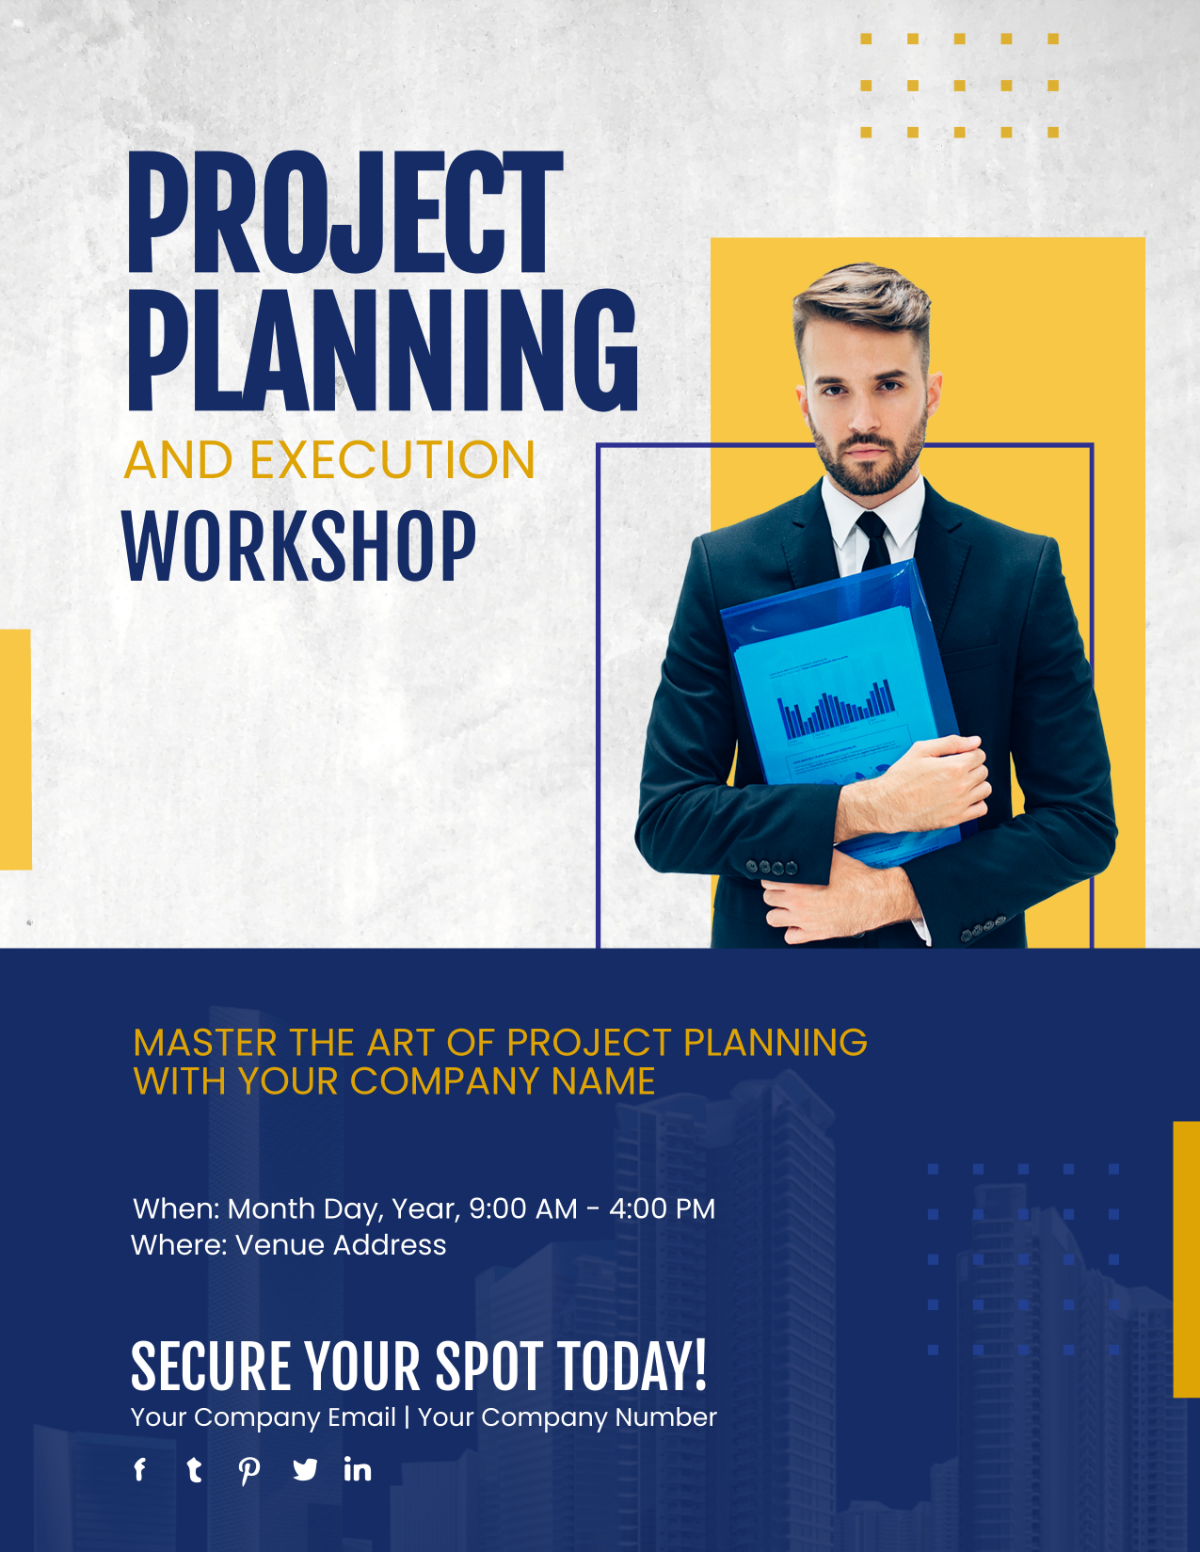 Project Planning and Execution Workshop Flyer